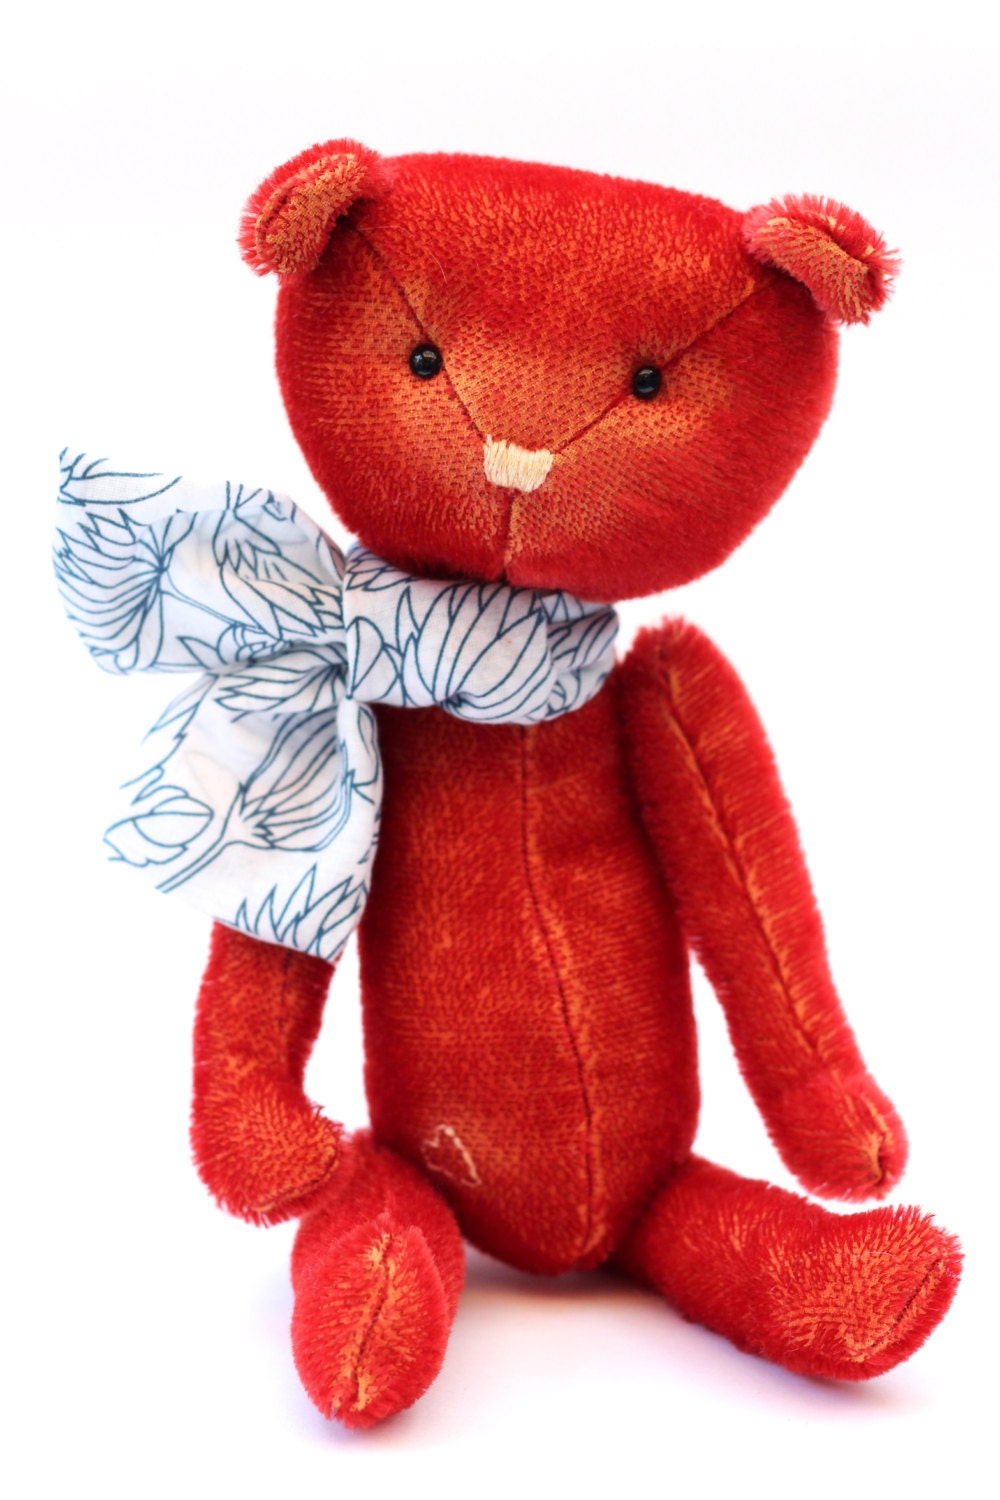 Rosie the red teddy bear with cute neck scarf